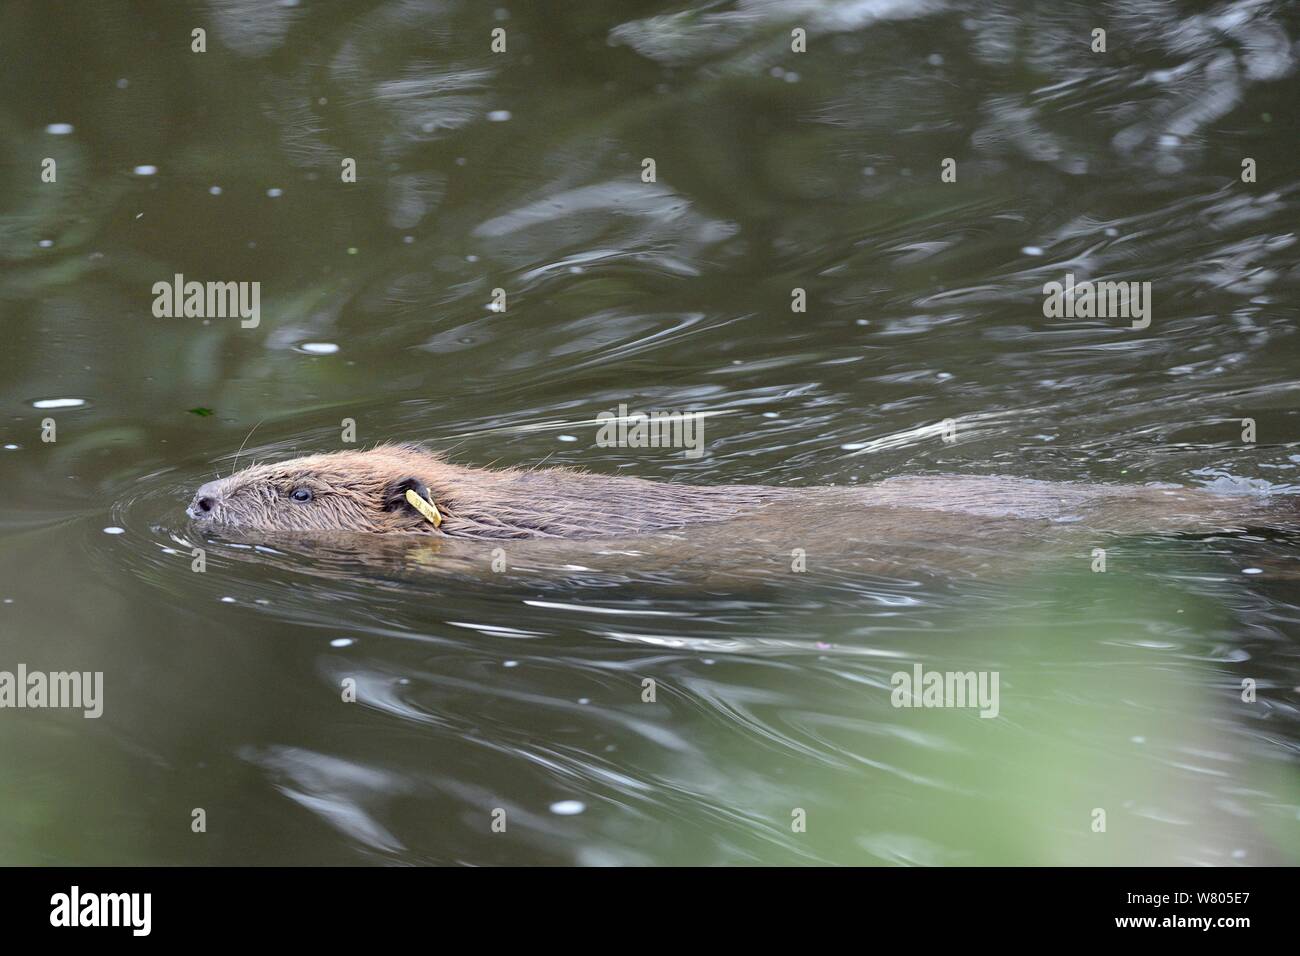 Ear-tagged adult female Eurasian beaver (Castor fiber) swimming on the River Otter at dusk, part of a release project managed by the Devon Wildlife Trust, Devon, England, UK, August 2015. Stock Photo